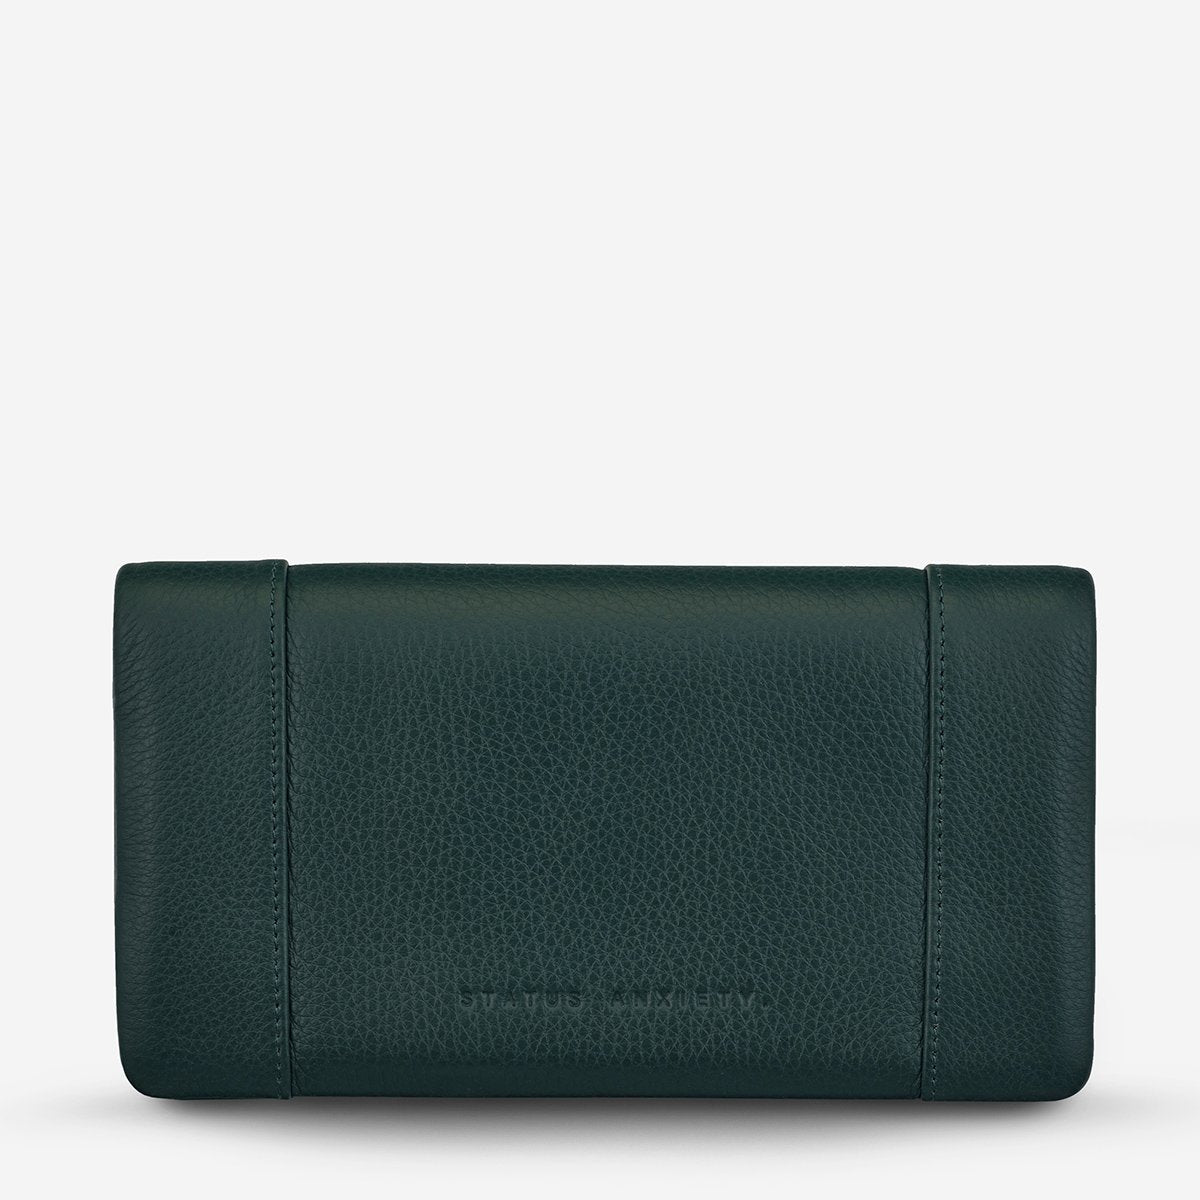 Status Anxiety Some Type of Love Wallet in Teal